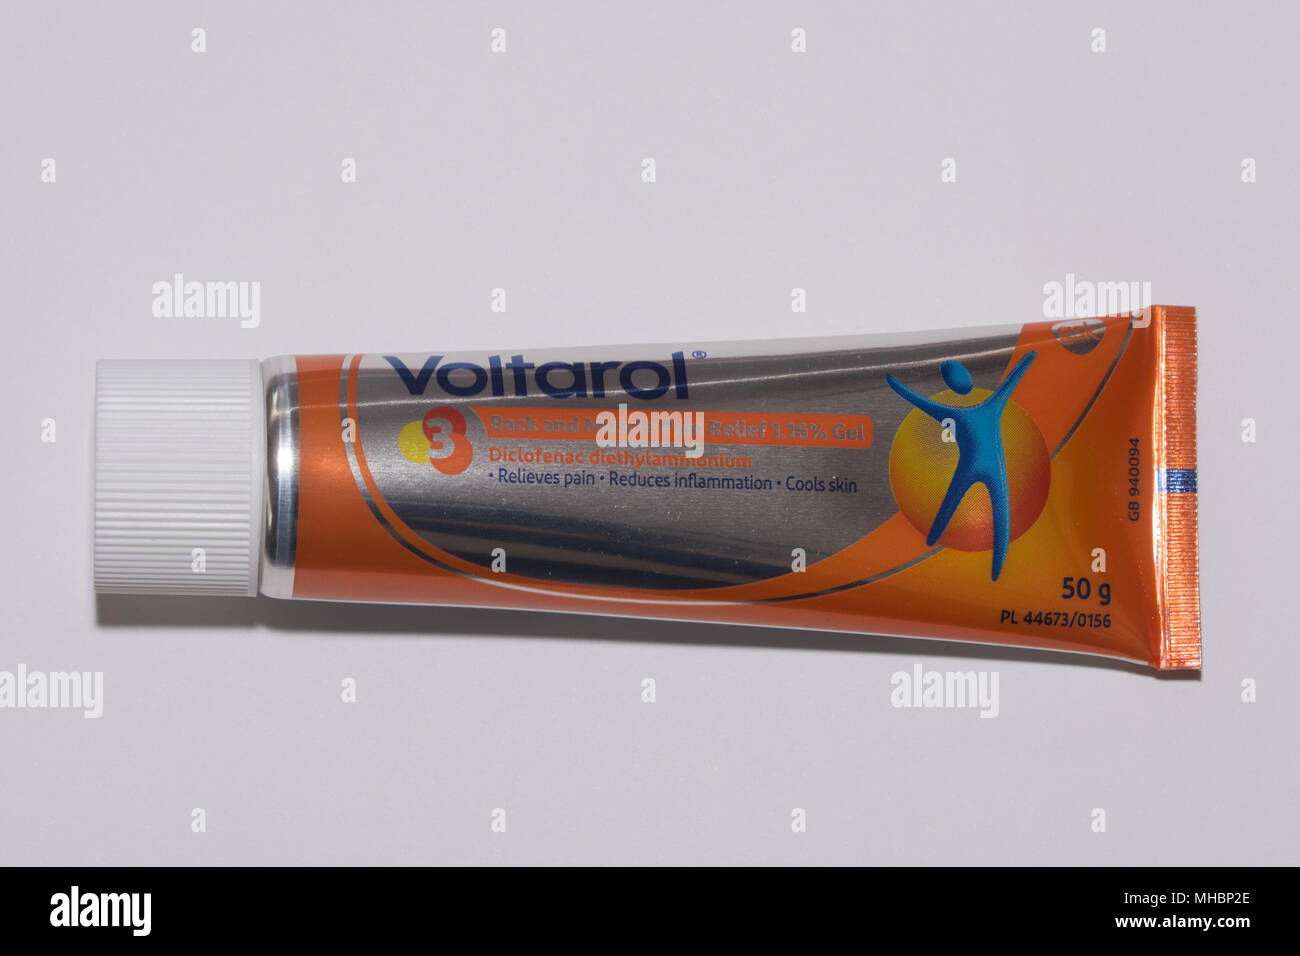 Tube of voltarol gel medication for relief of body and muscle pain Stock Photo